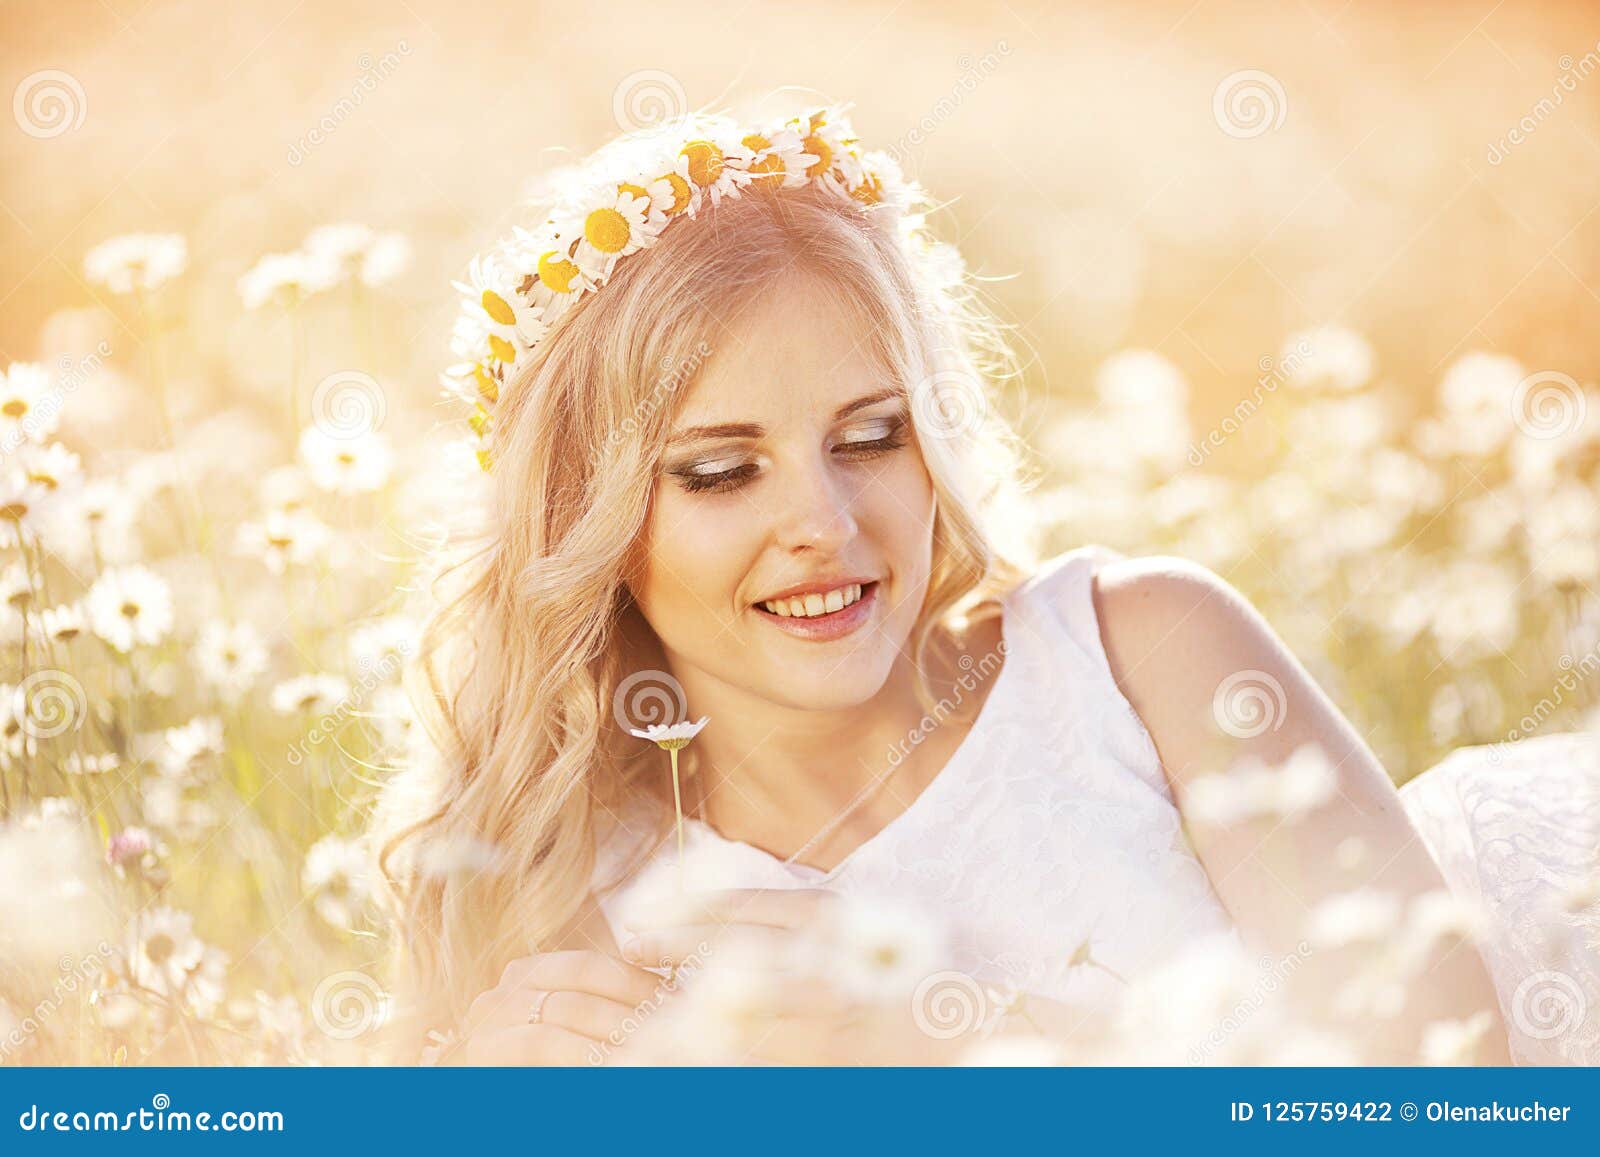 Beautiful Blonde in a Chamomile Field Stock Photo - Image of happy ...